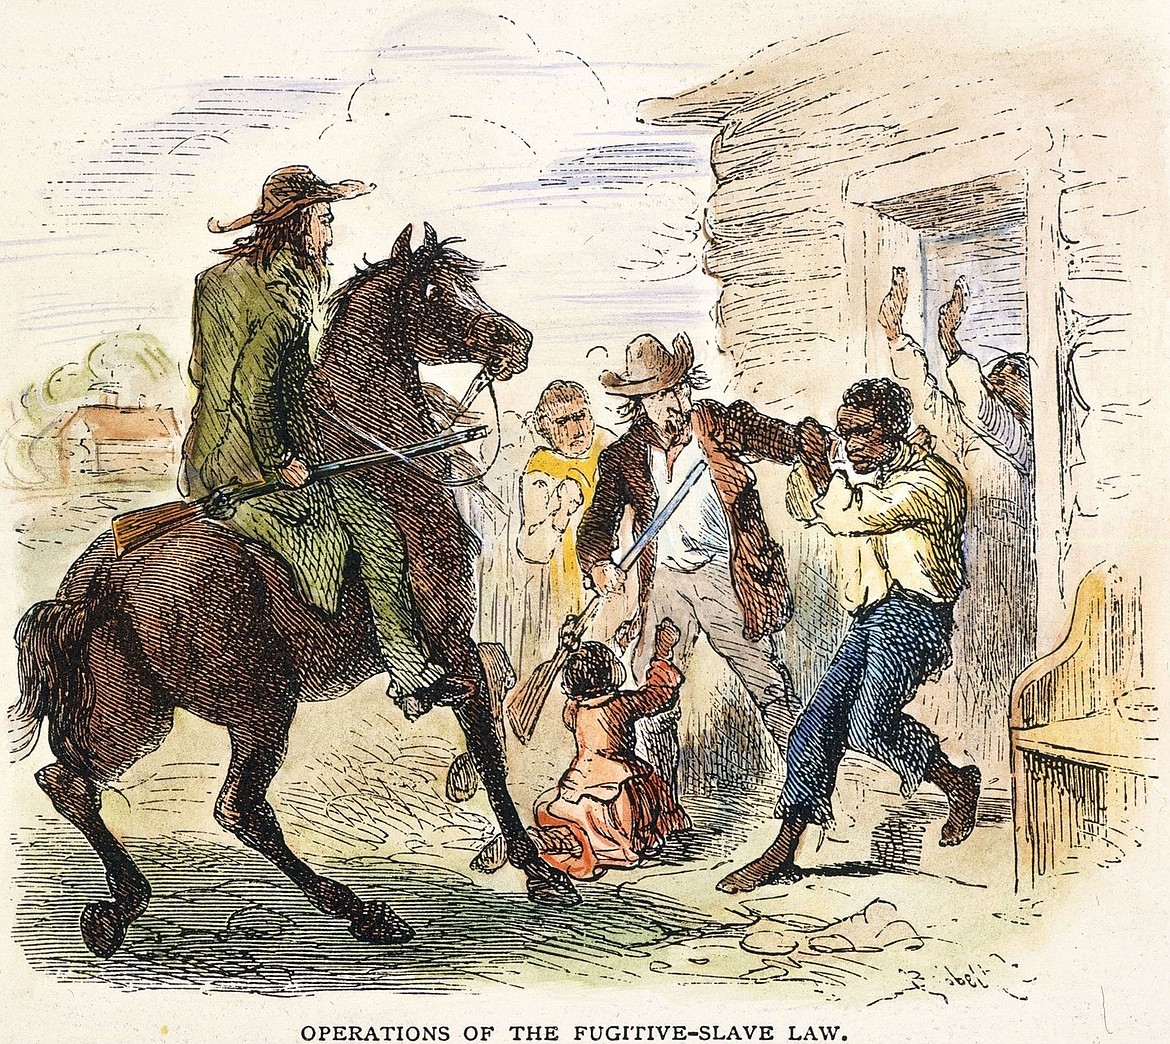 The Fugitive Slave Act of 1850 strengthened an earlier slave law and encouraged slave catchers by offering rewards for catching runaways — even in non-slavery states.